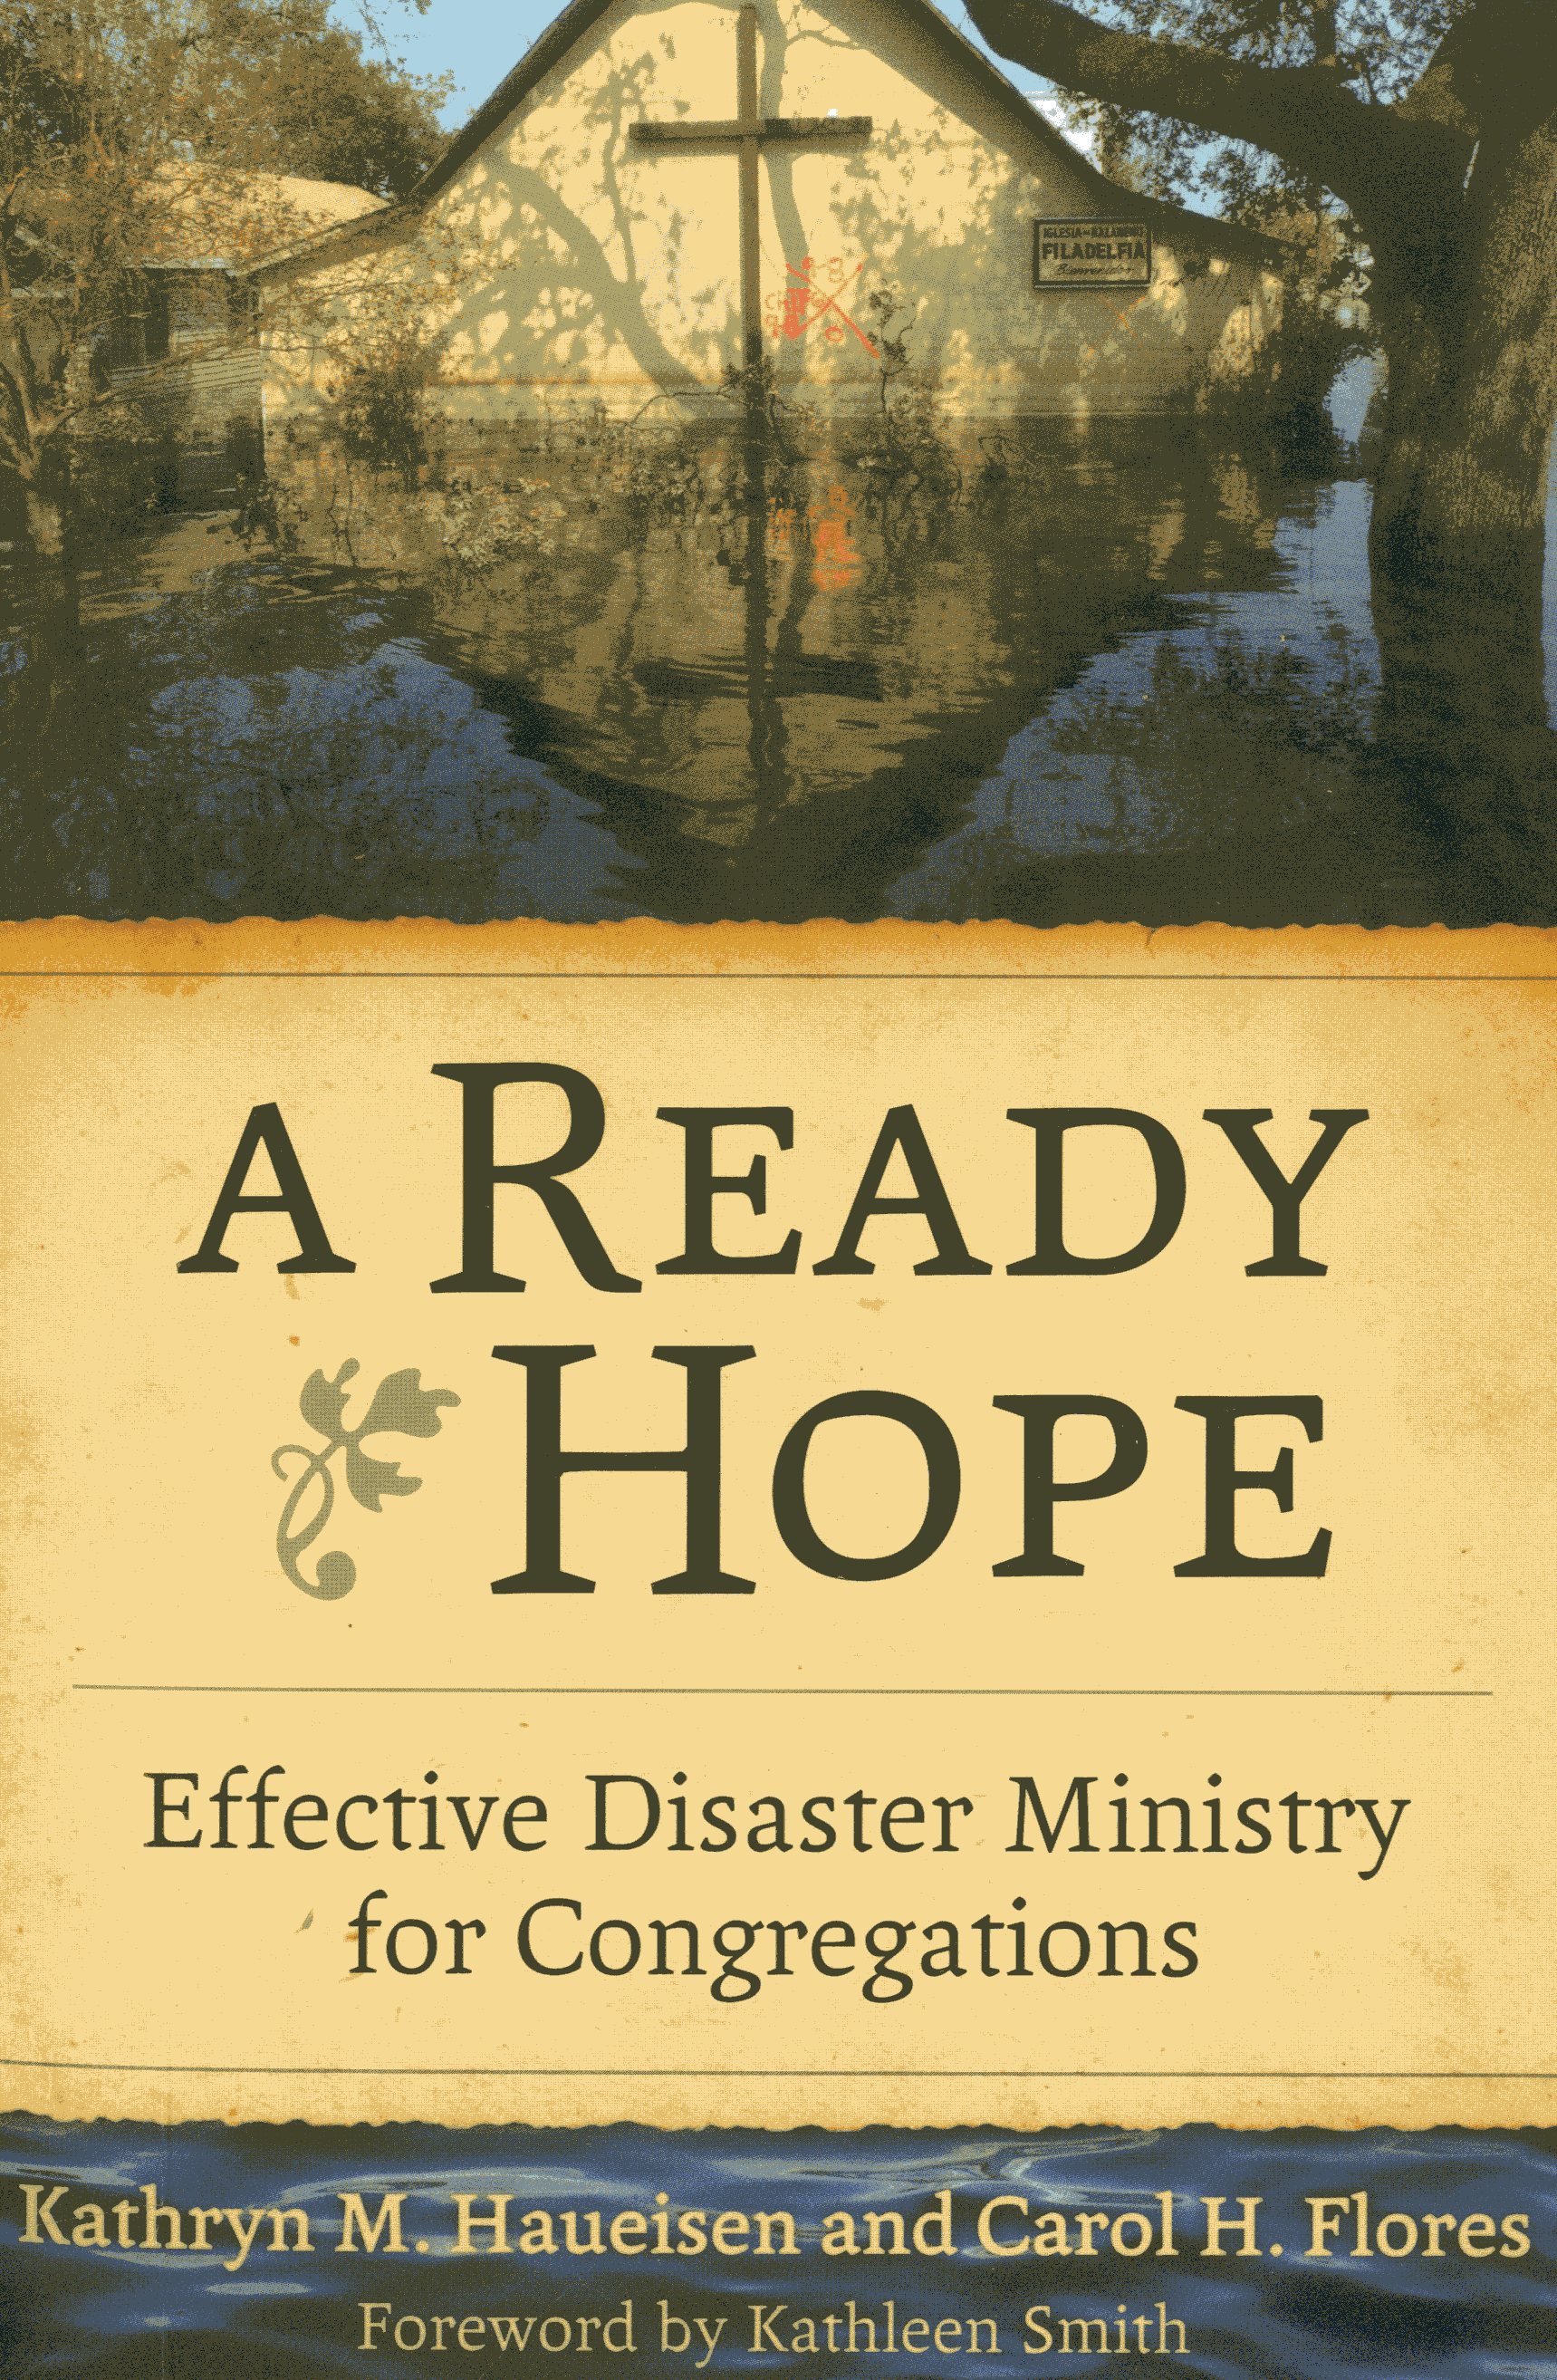 A Ready Hope: Effective Disaster Ministry for Congregations